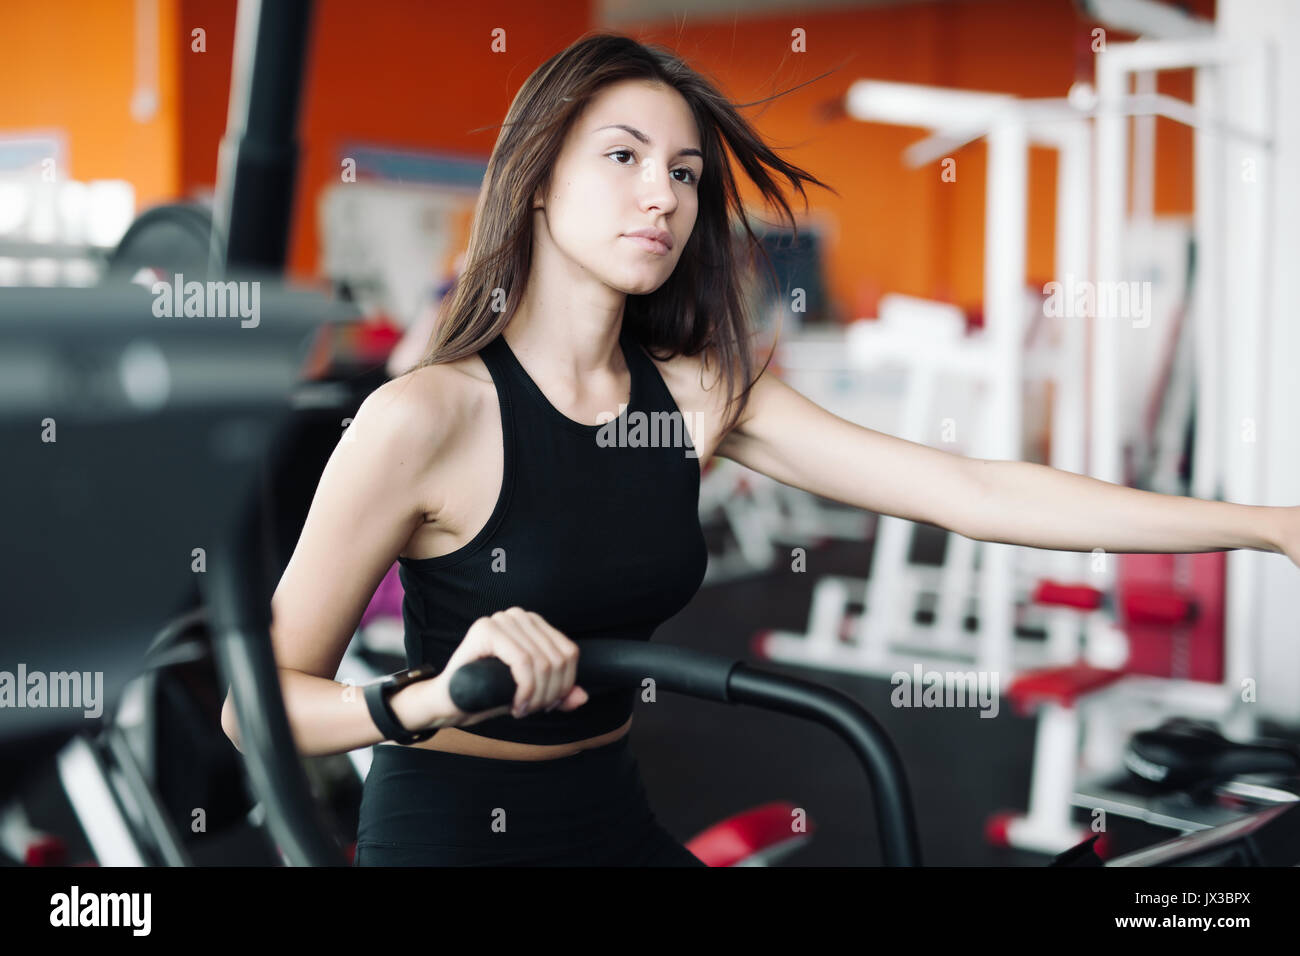 Young beautiful white girl in black sports suit is engaged on a stationary bike in the fitness club. Stock Photo